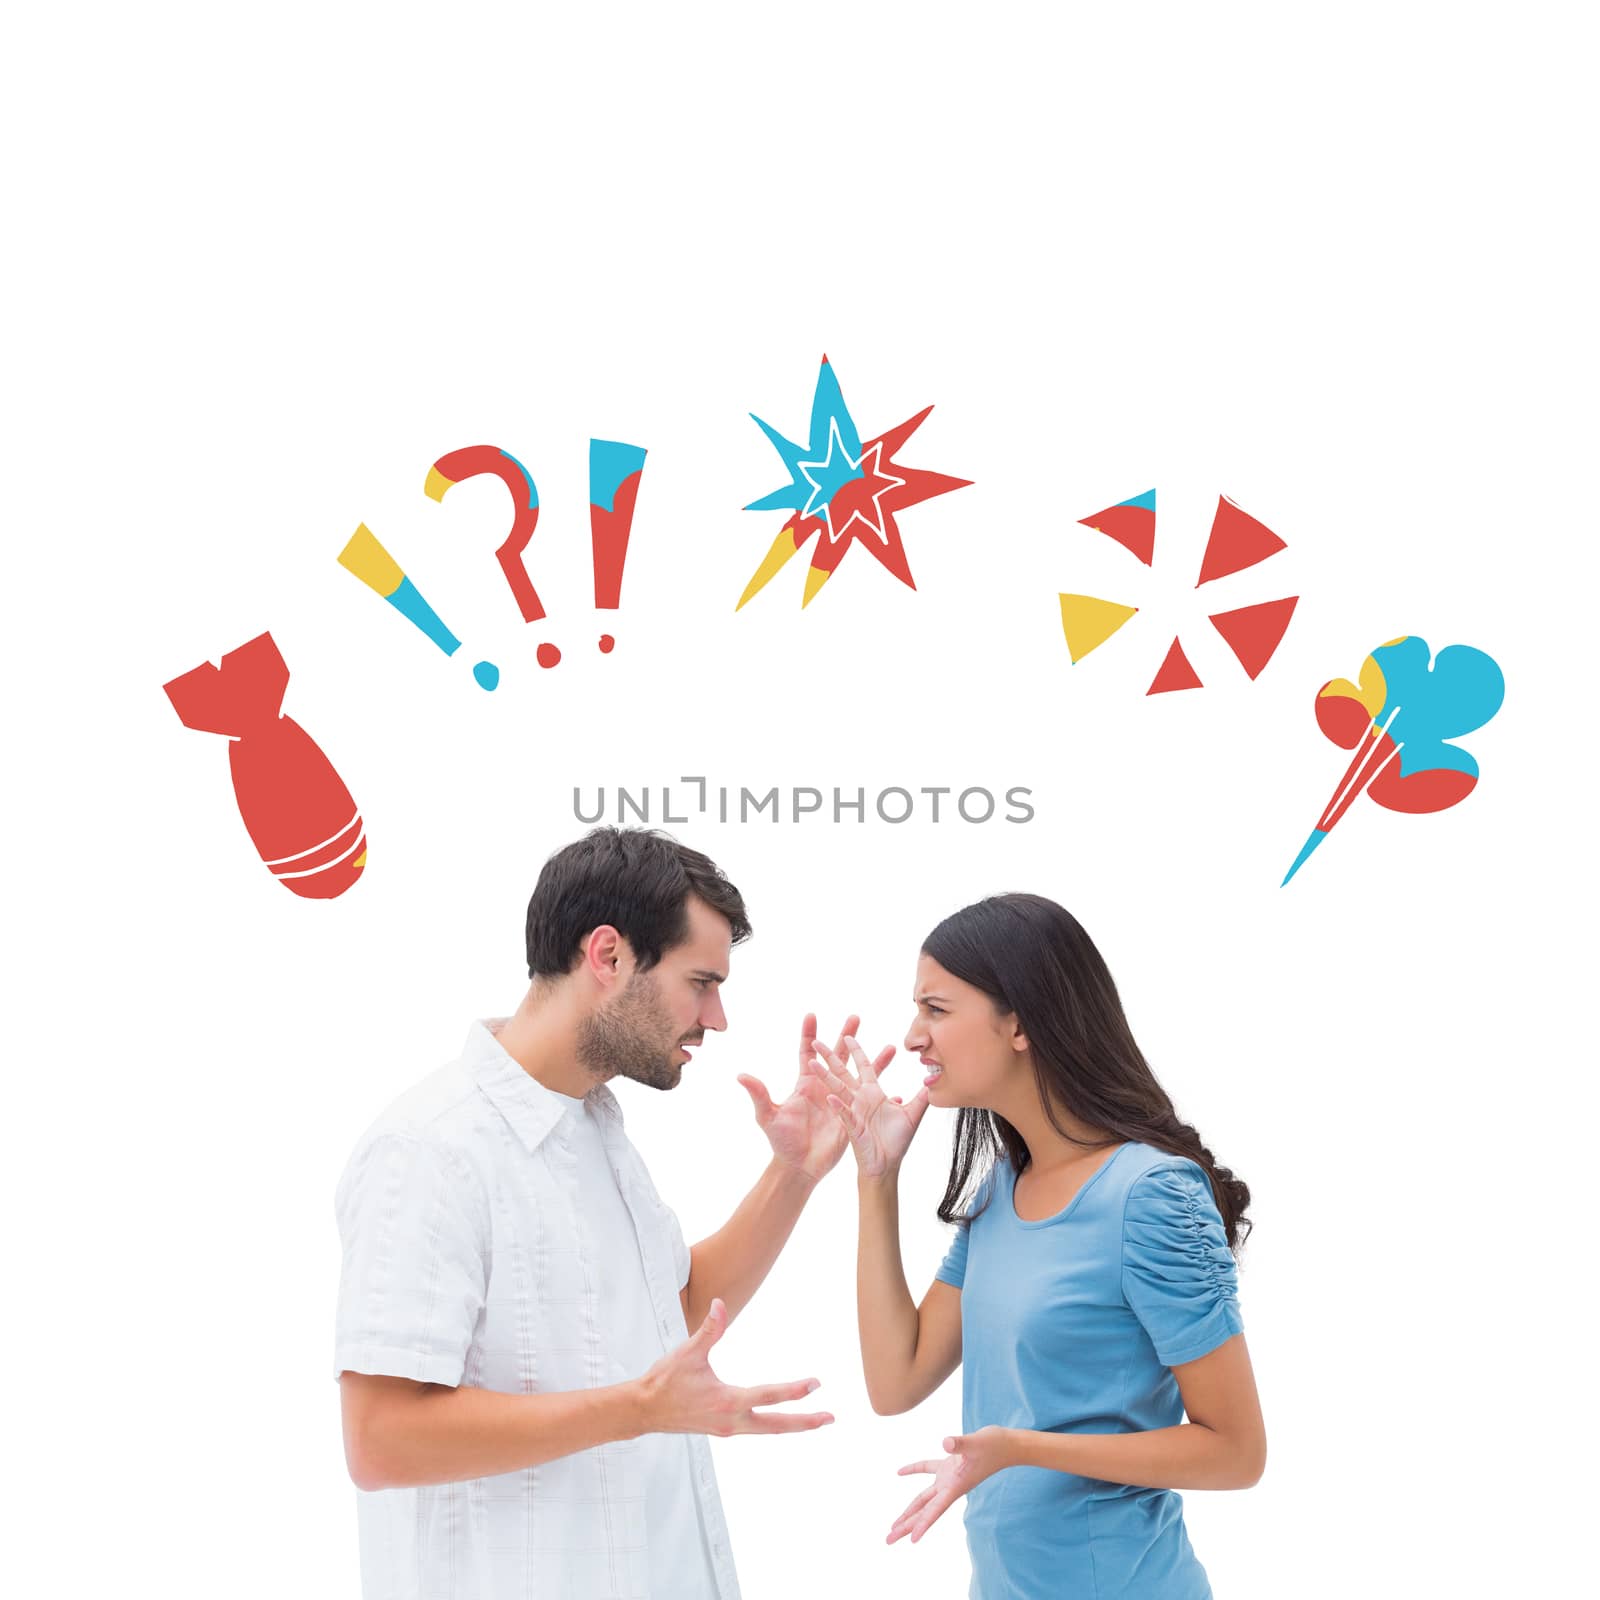 Composite image of angry brunette shouting at boyfriend by Wavebreakmedia